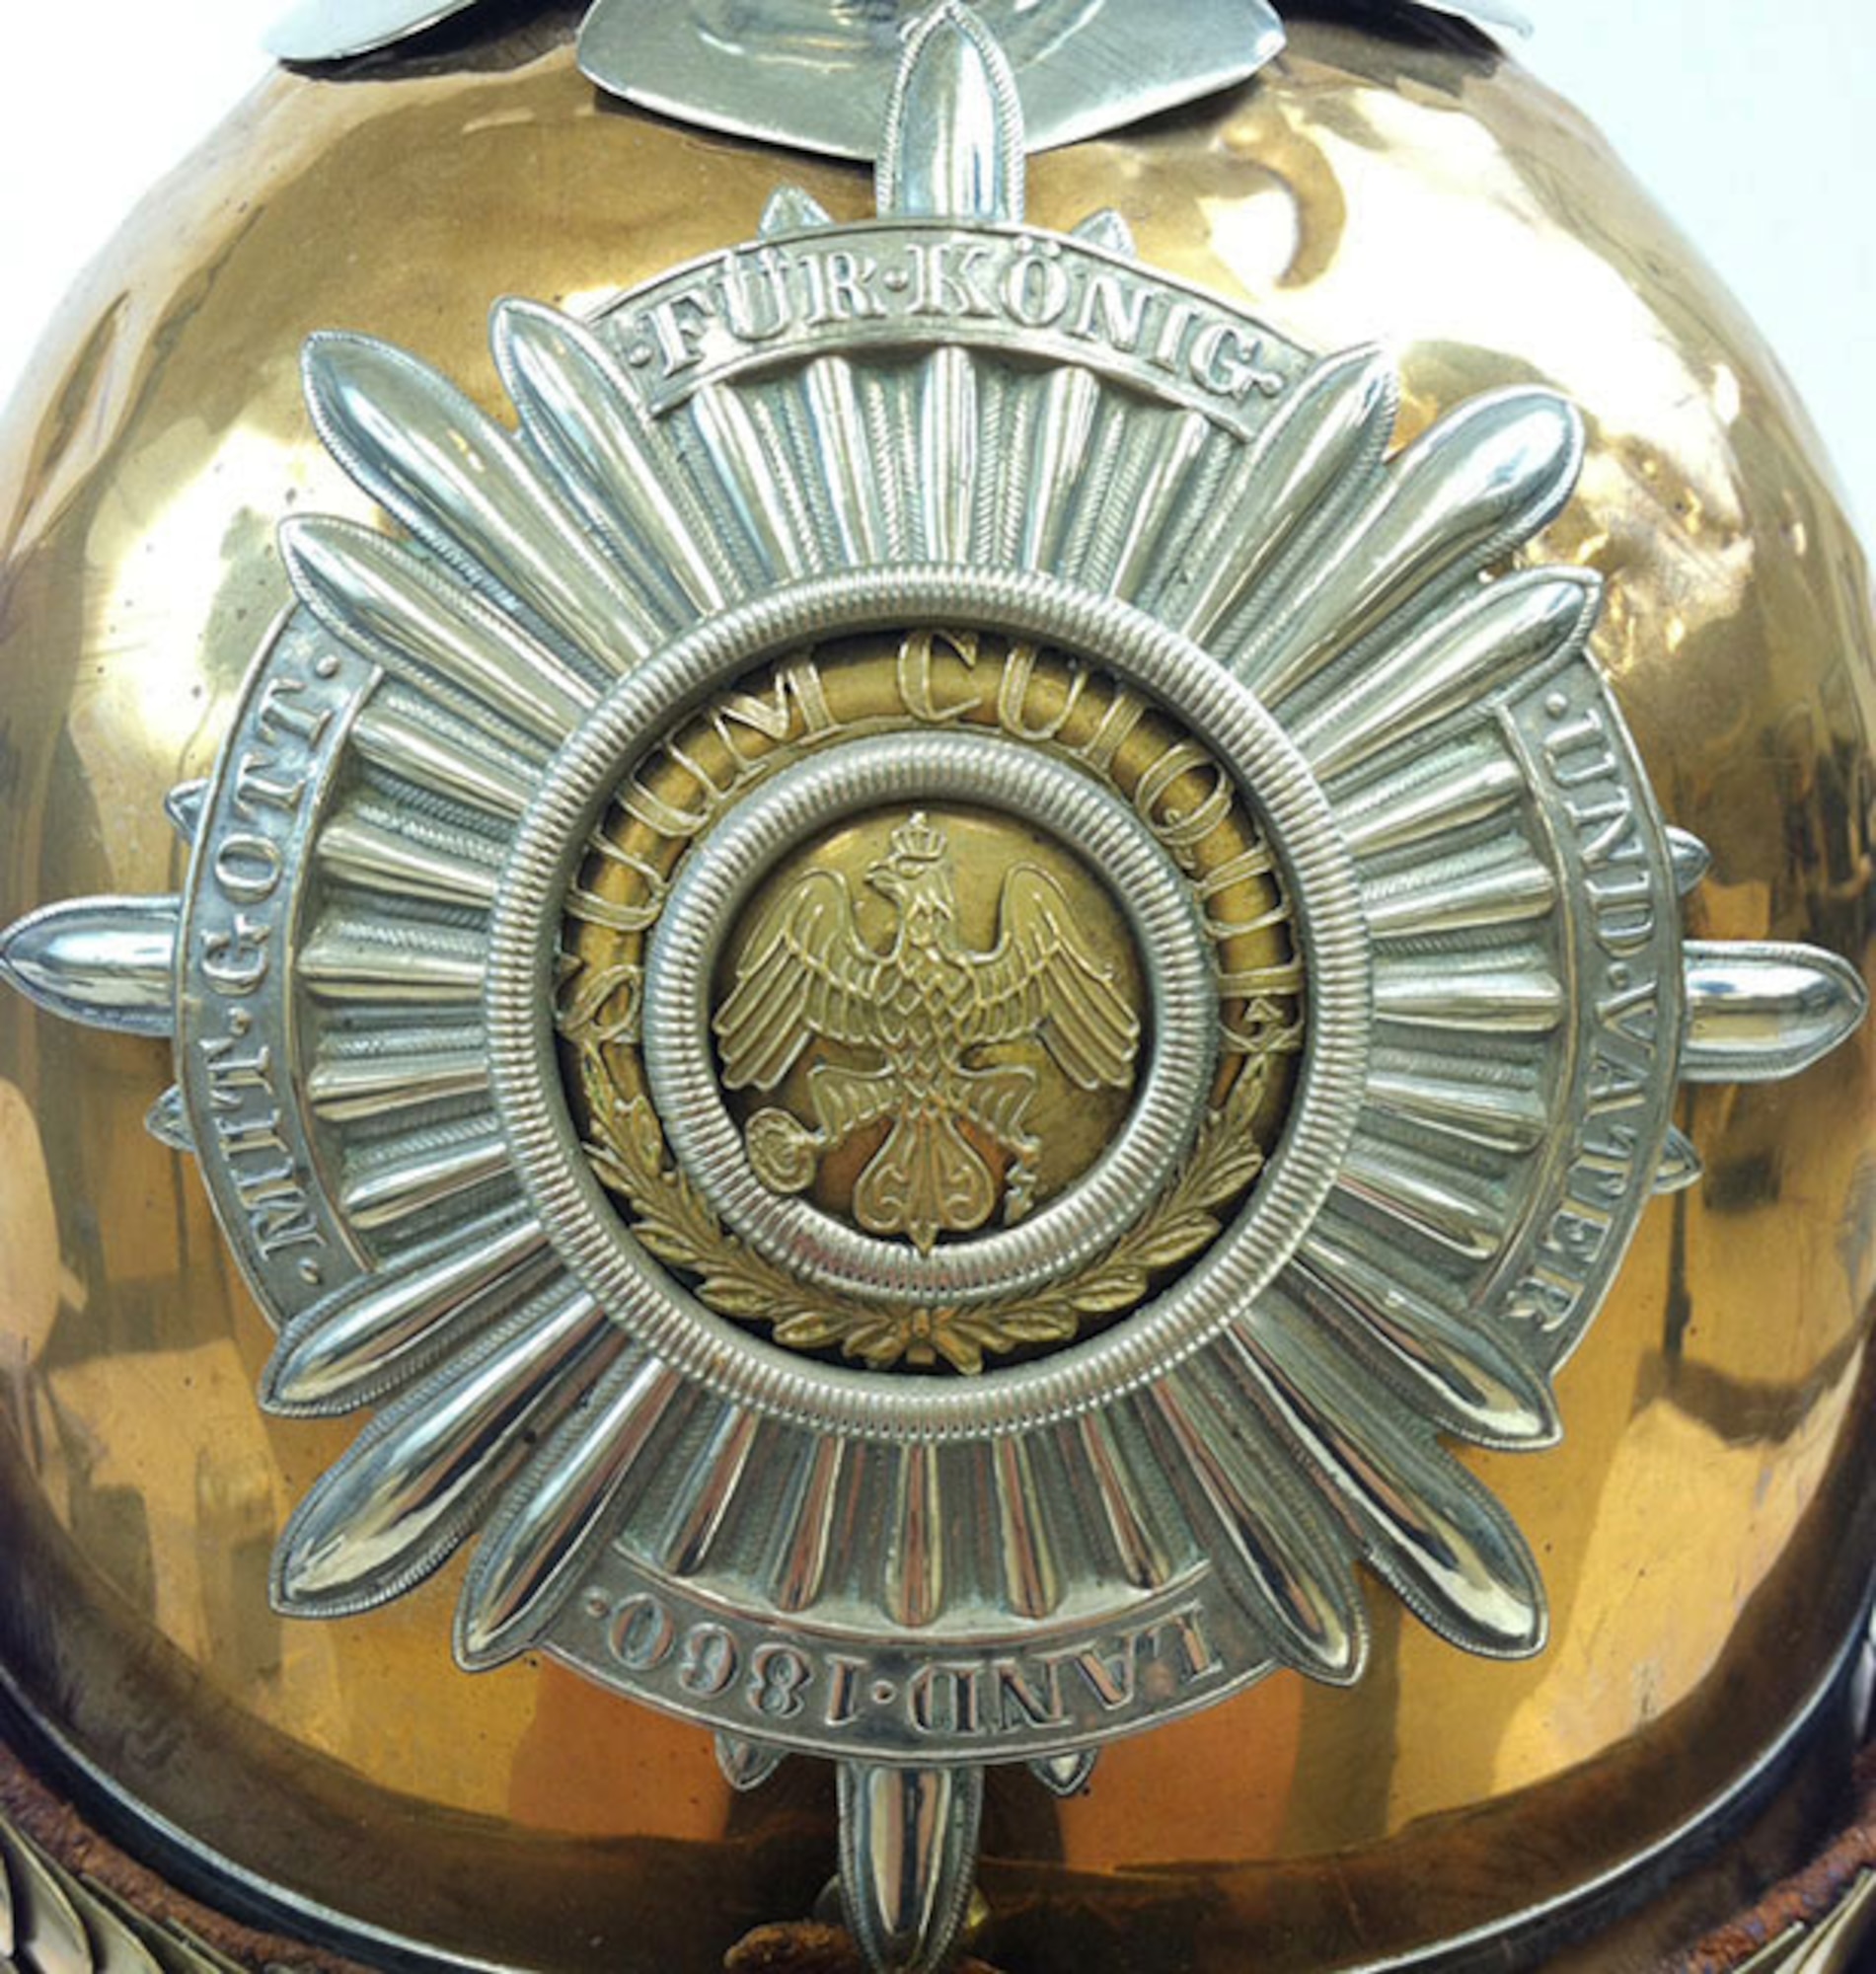 This spiked helmet, known as a pickelhaube, was originally designed by King Frederick Wilhelm IV of Prussia in 1842. This helmet design was popular among the Russian and German militaries and police prior to and during World War I. Capt. Edward V. Rickenbacker, America’s highest scoring ace of WWI, brought this Prussian cavalry officer’s helmet home as a wartime souvenir. It is unknown how he attained it. (U.S. Air Force photo)